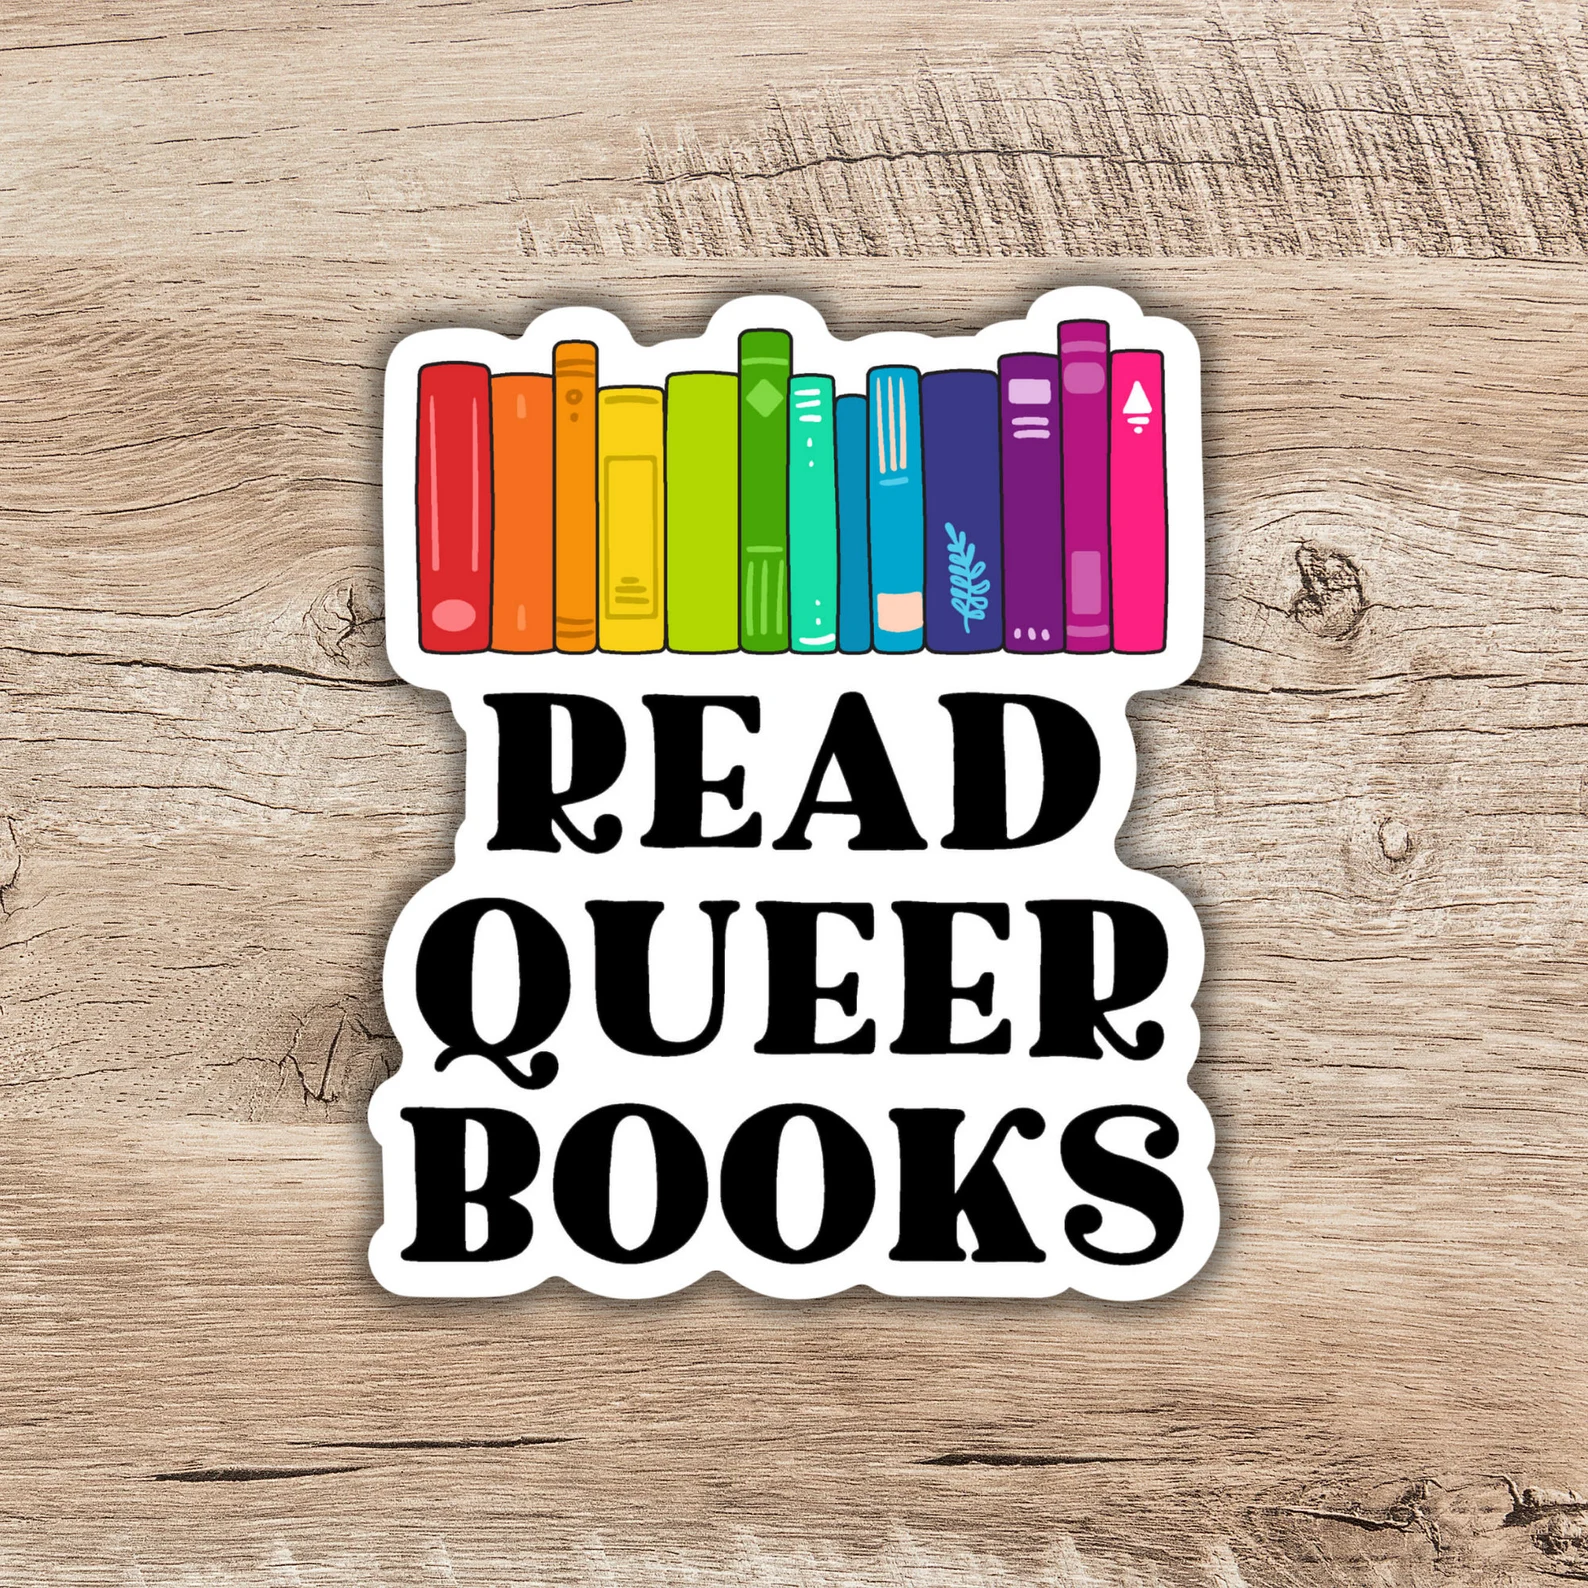 Image of rainbow book spines with "read queer books" underneath. 